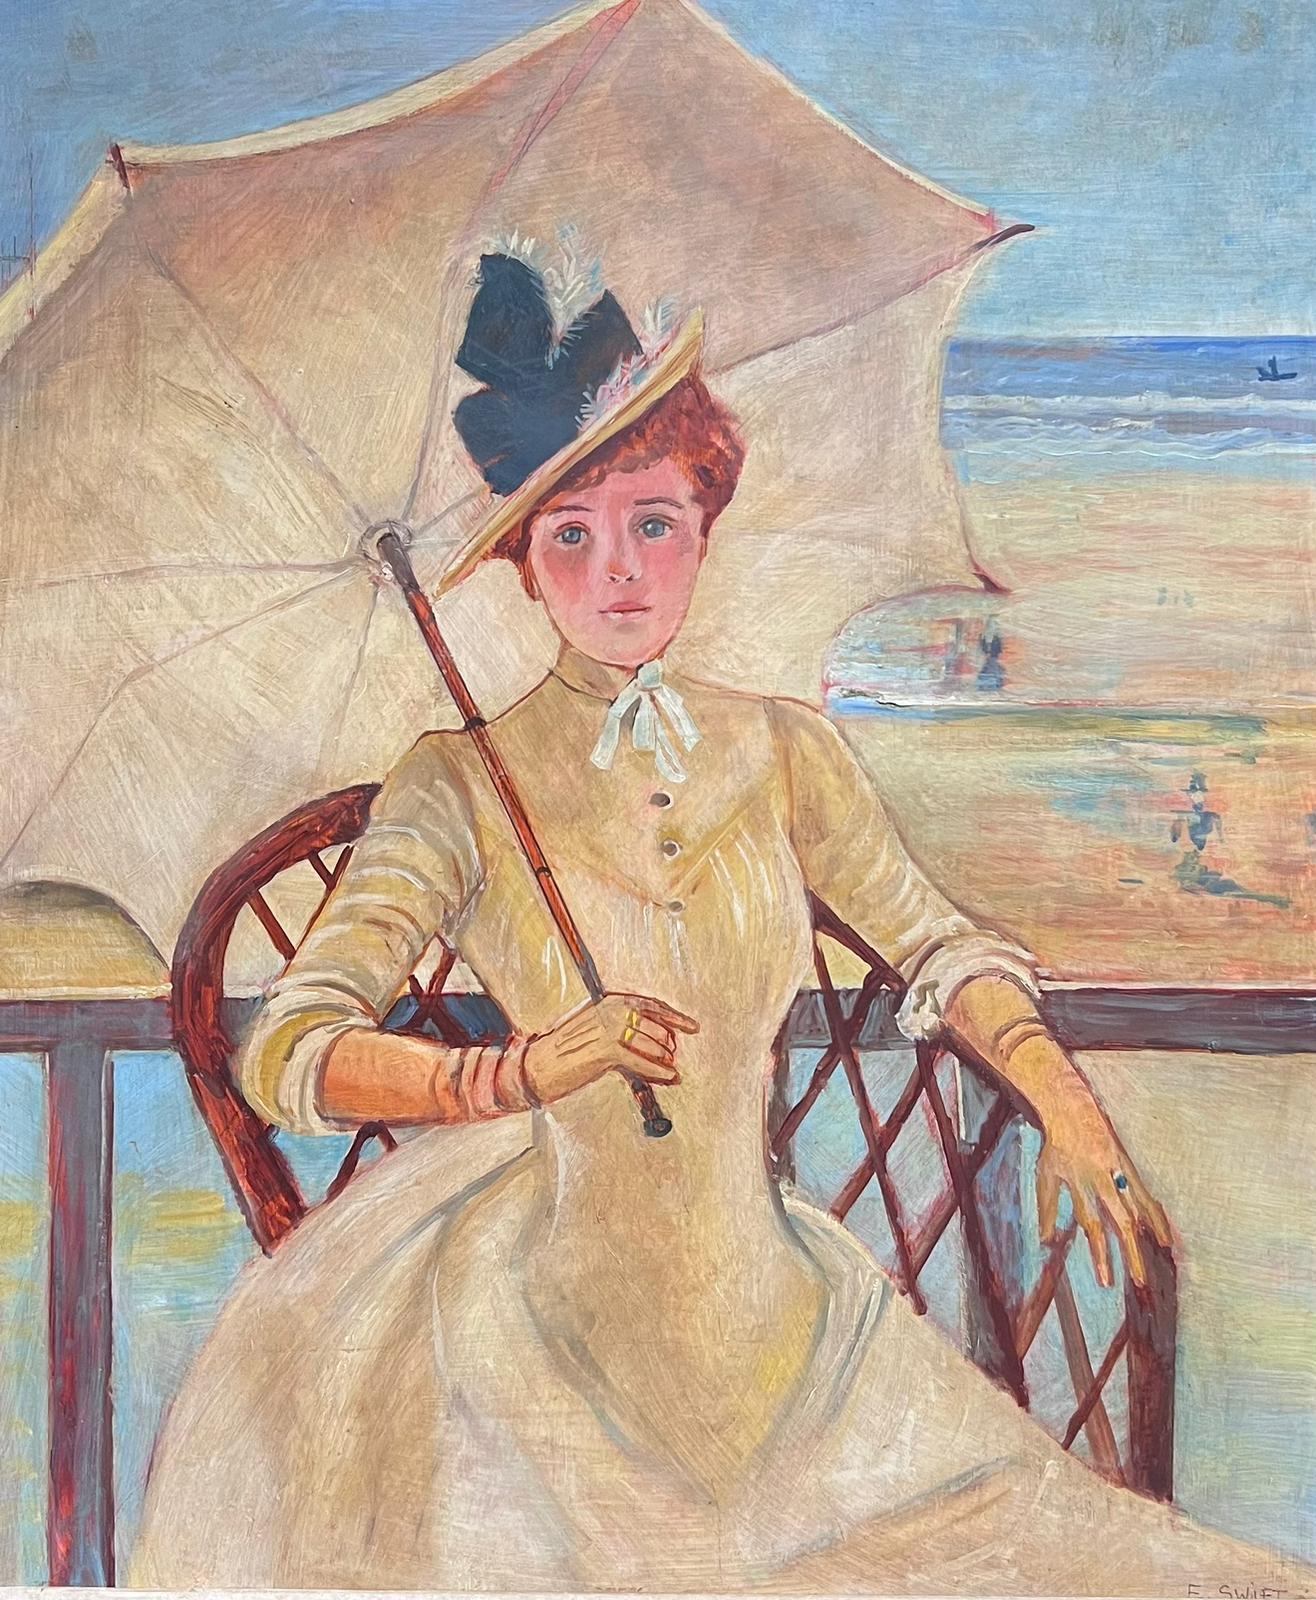 Portrait of an Elegant Lady under Parasol, the beach in the distance
English School, Impressionist
signed oil on board, framed
framed: 32 x 27 inches
board: 24 x 20 inches
provenance: private collection, England
condition: very good and sound